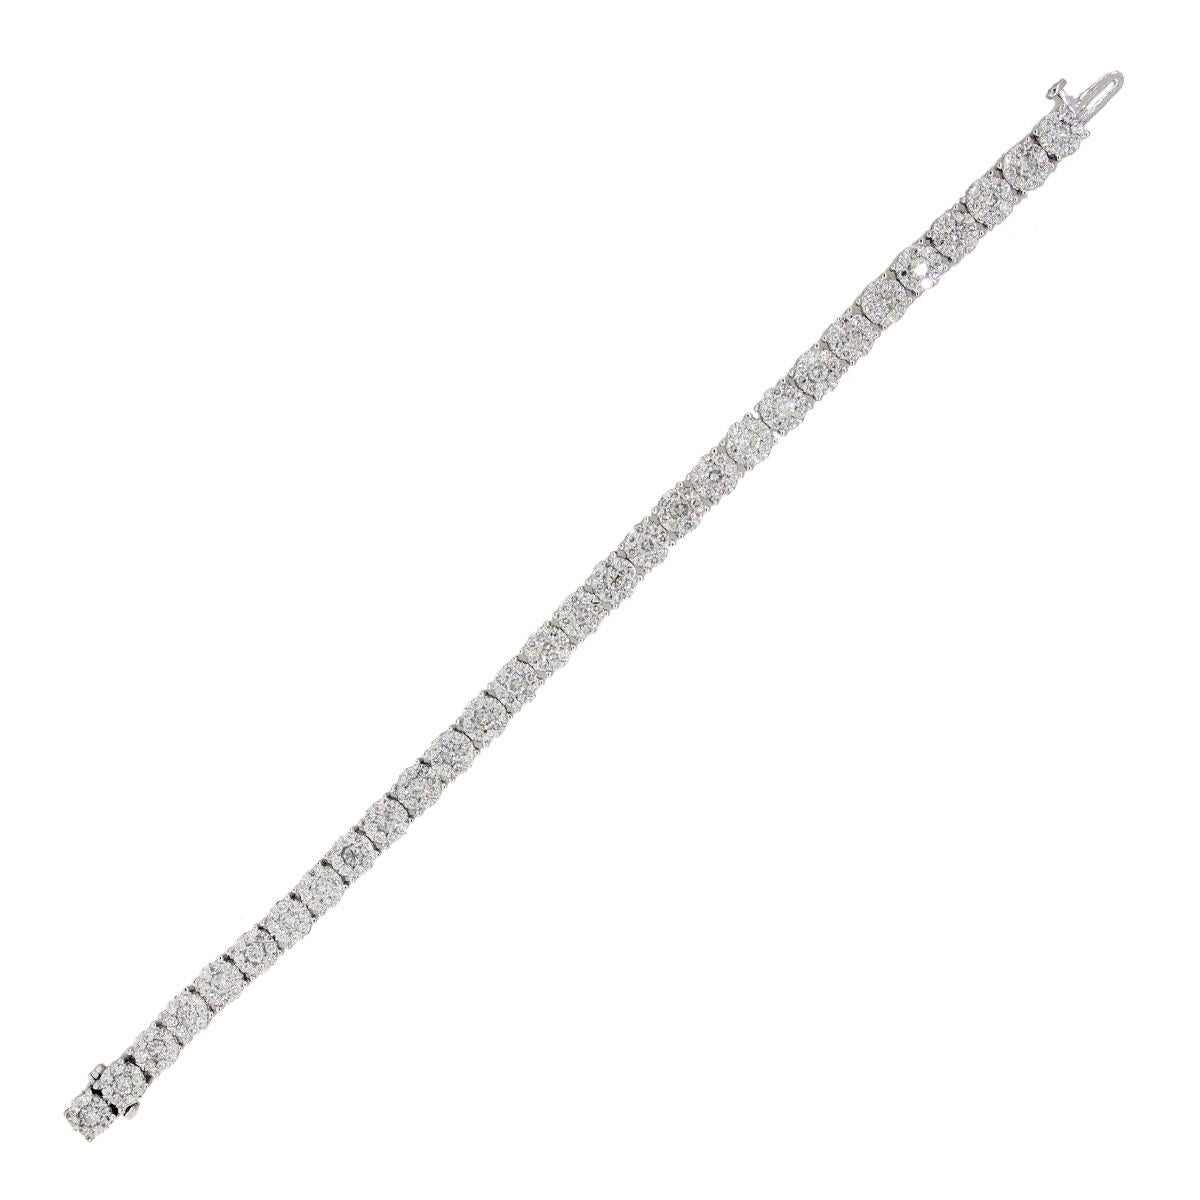 Material: 14k white gold
Diamond Details: Approximately 6ctw of round brilliant diamonds. Diamonds are G/S in color and I1 in clarity.
Measurements: 7″ in length
Clasp: Tongue in box clasp
Total Weight: 15.2g (9.8dwt)
Additional Details: This item